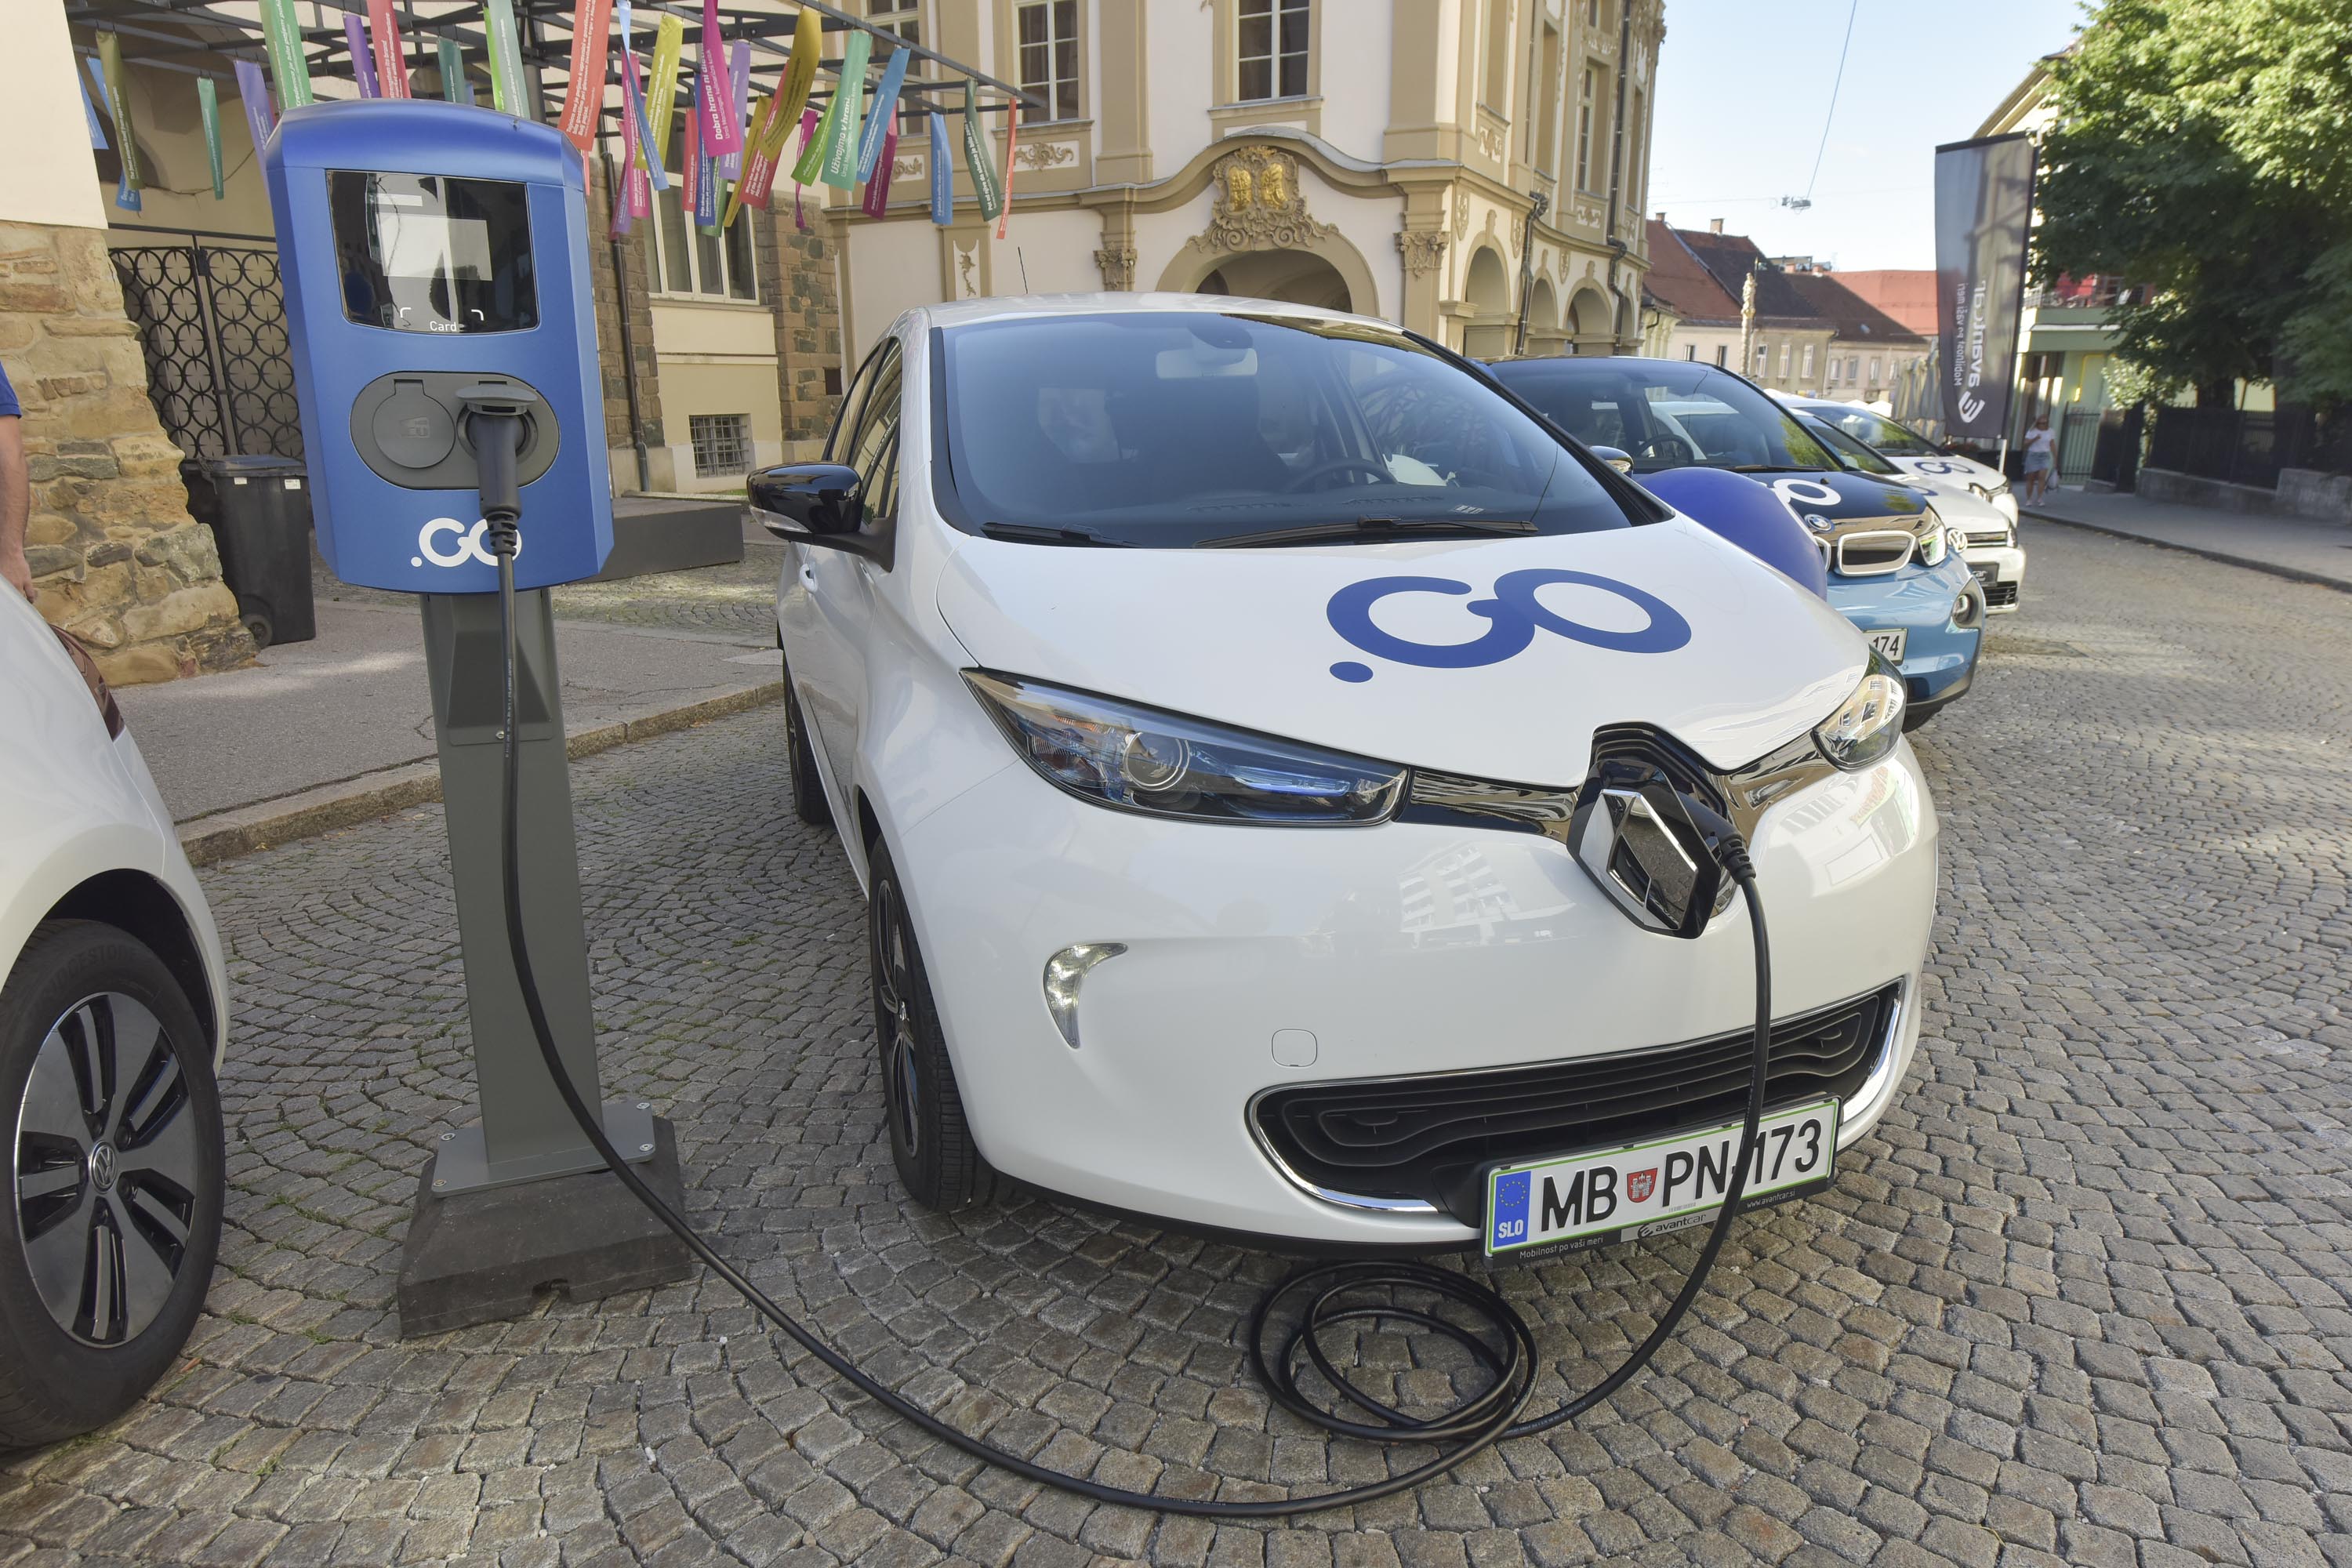 Sharing of electric vehicles in Slovenia